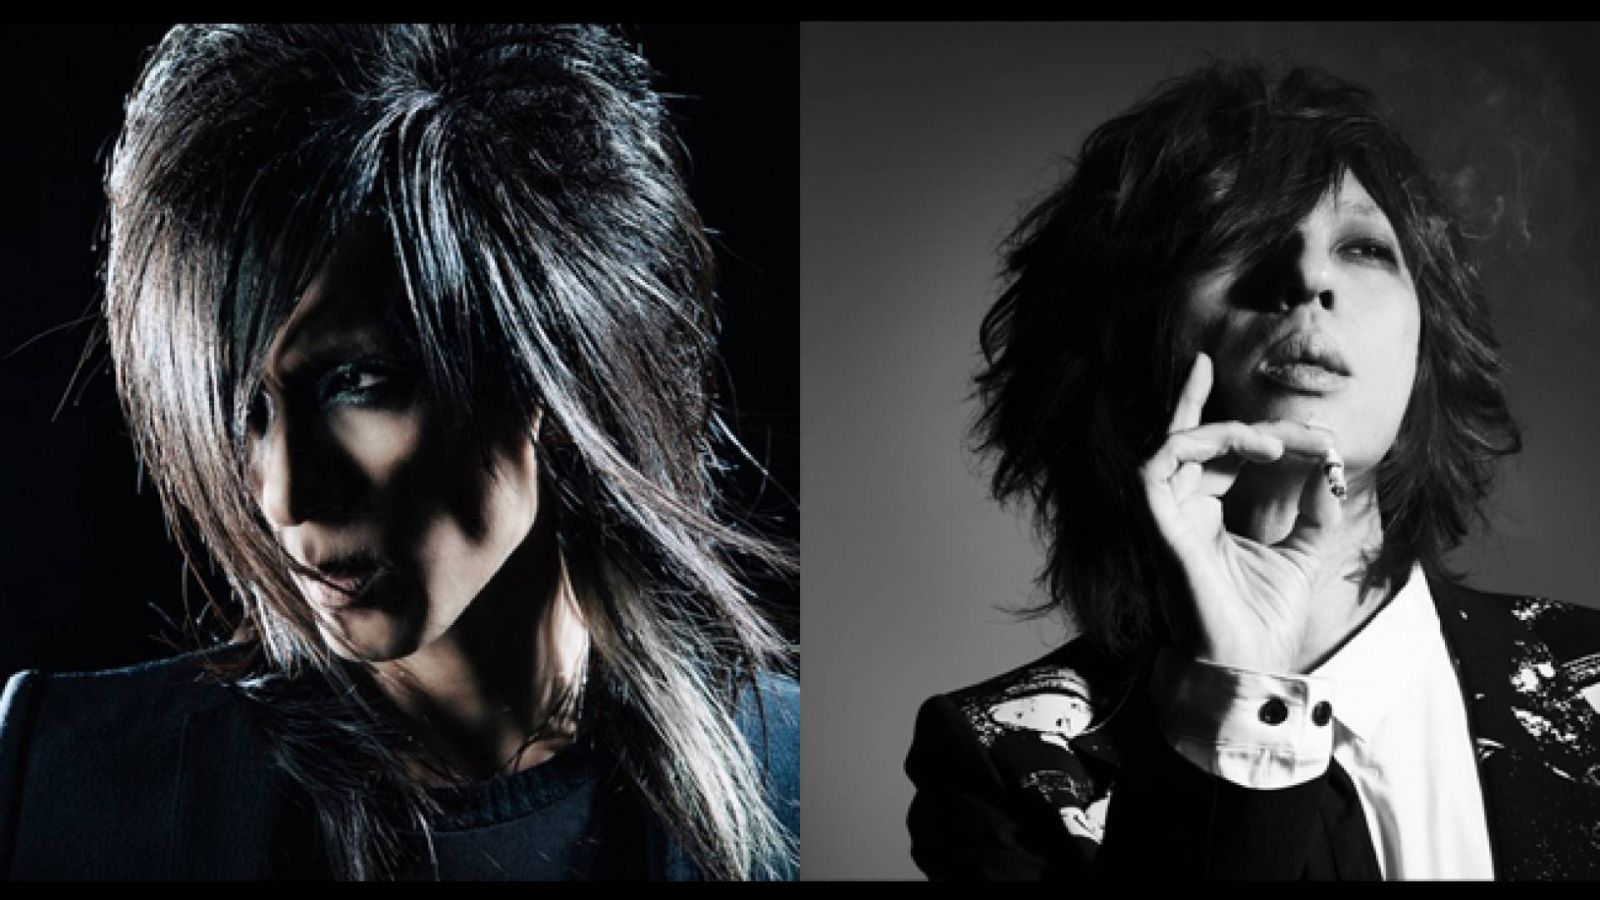 MORRIE and Kiyoharu to Perform in New York © MORRIE and Kiyoharu. All rights reserved.